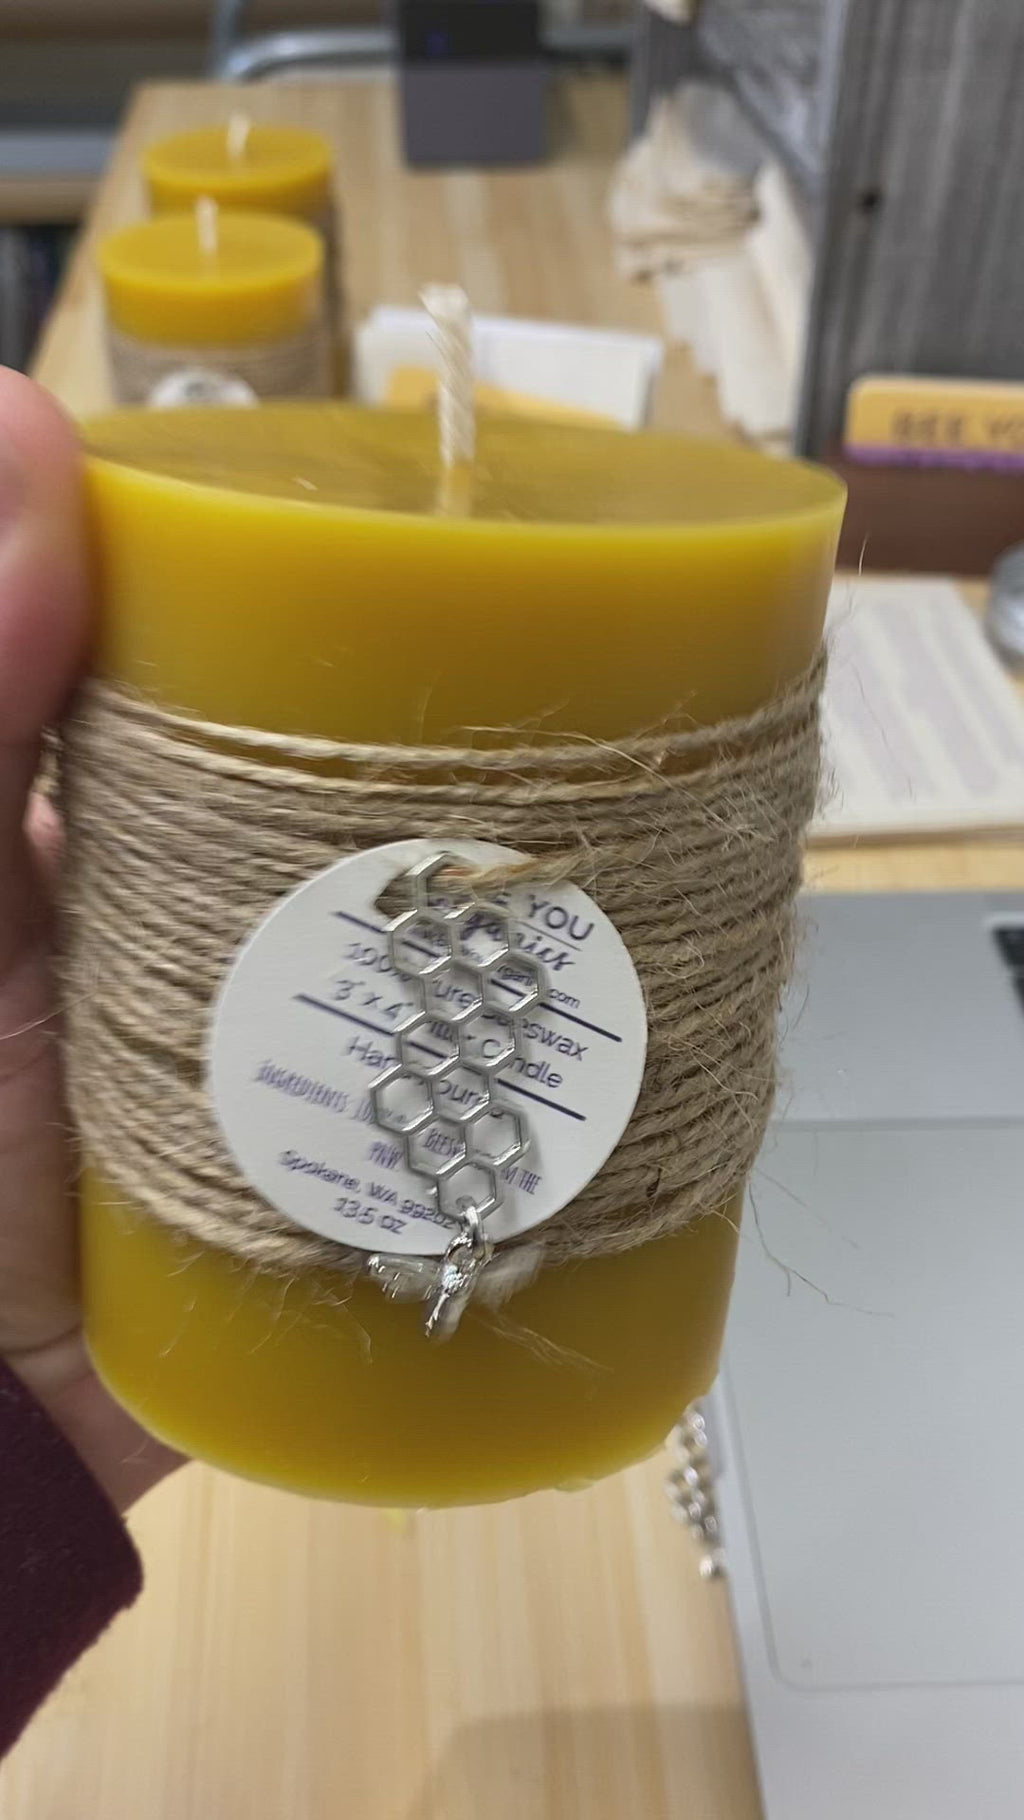 Pure Beeswax Pillar Candles, Cruelty Free Candles